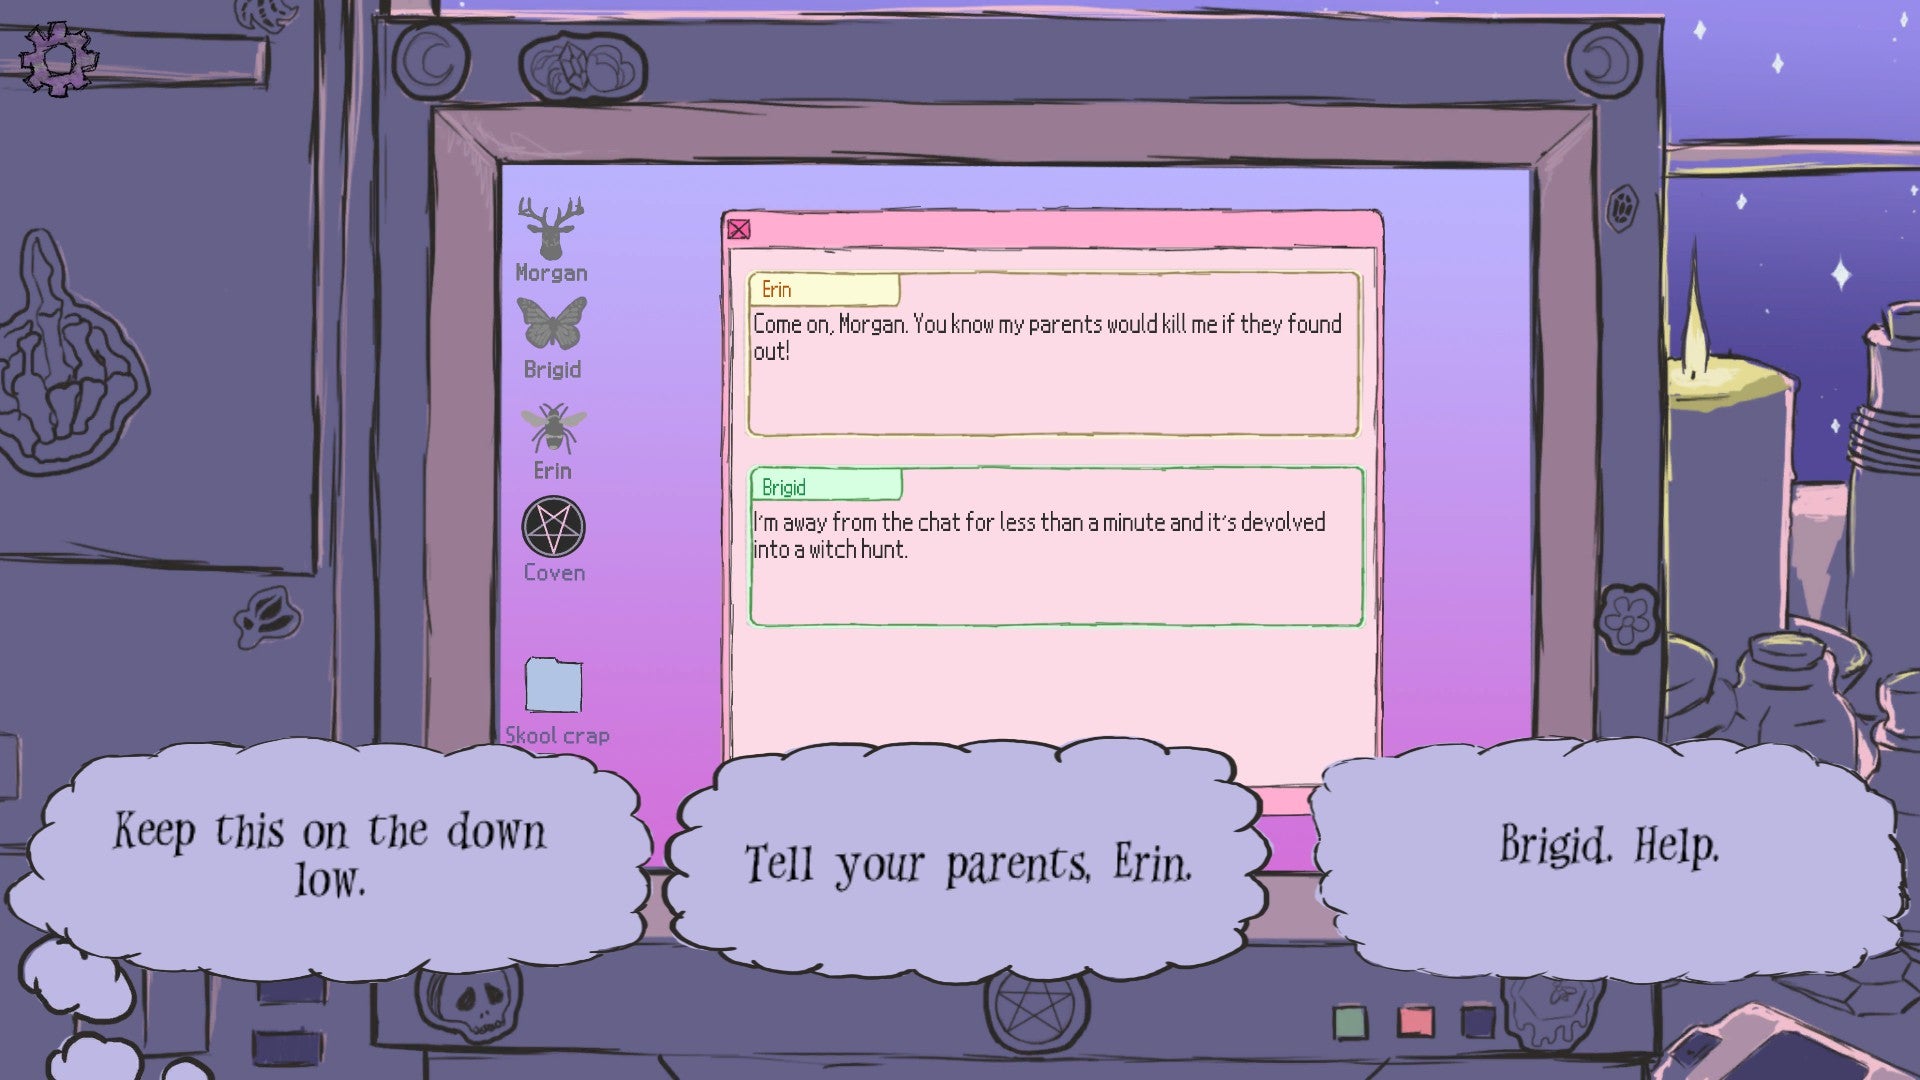 A So May It Be screenshot showing a purple desktop with a chat window